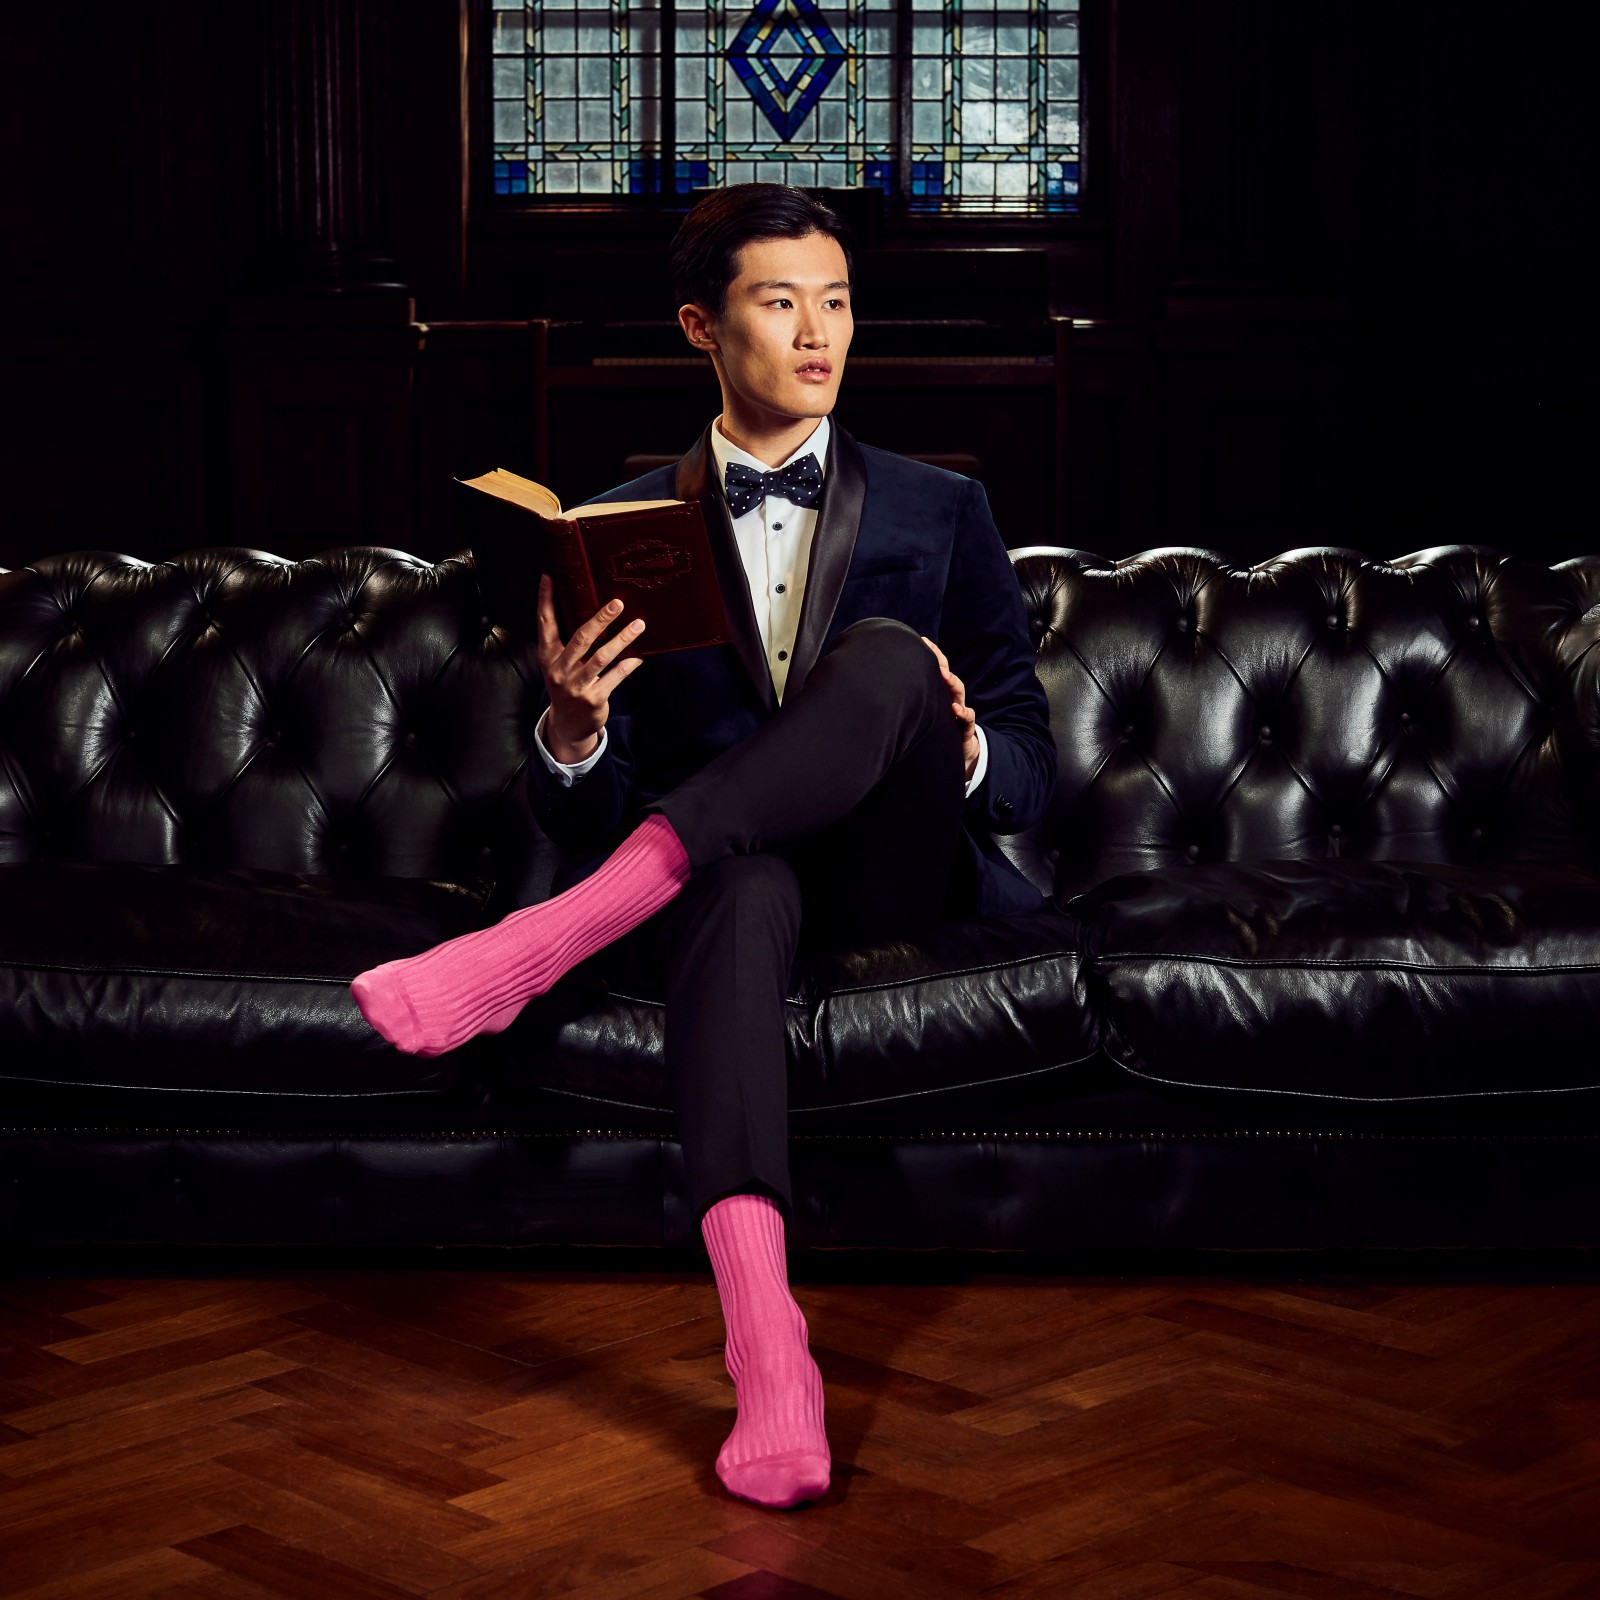 A man sitting on a sofa with bright pink socks